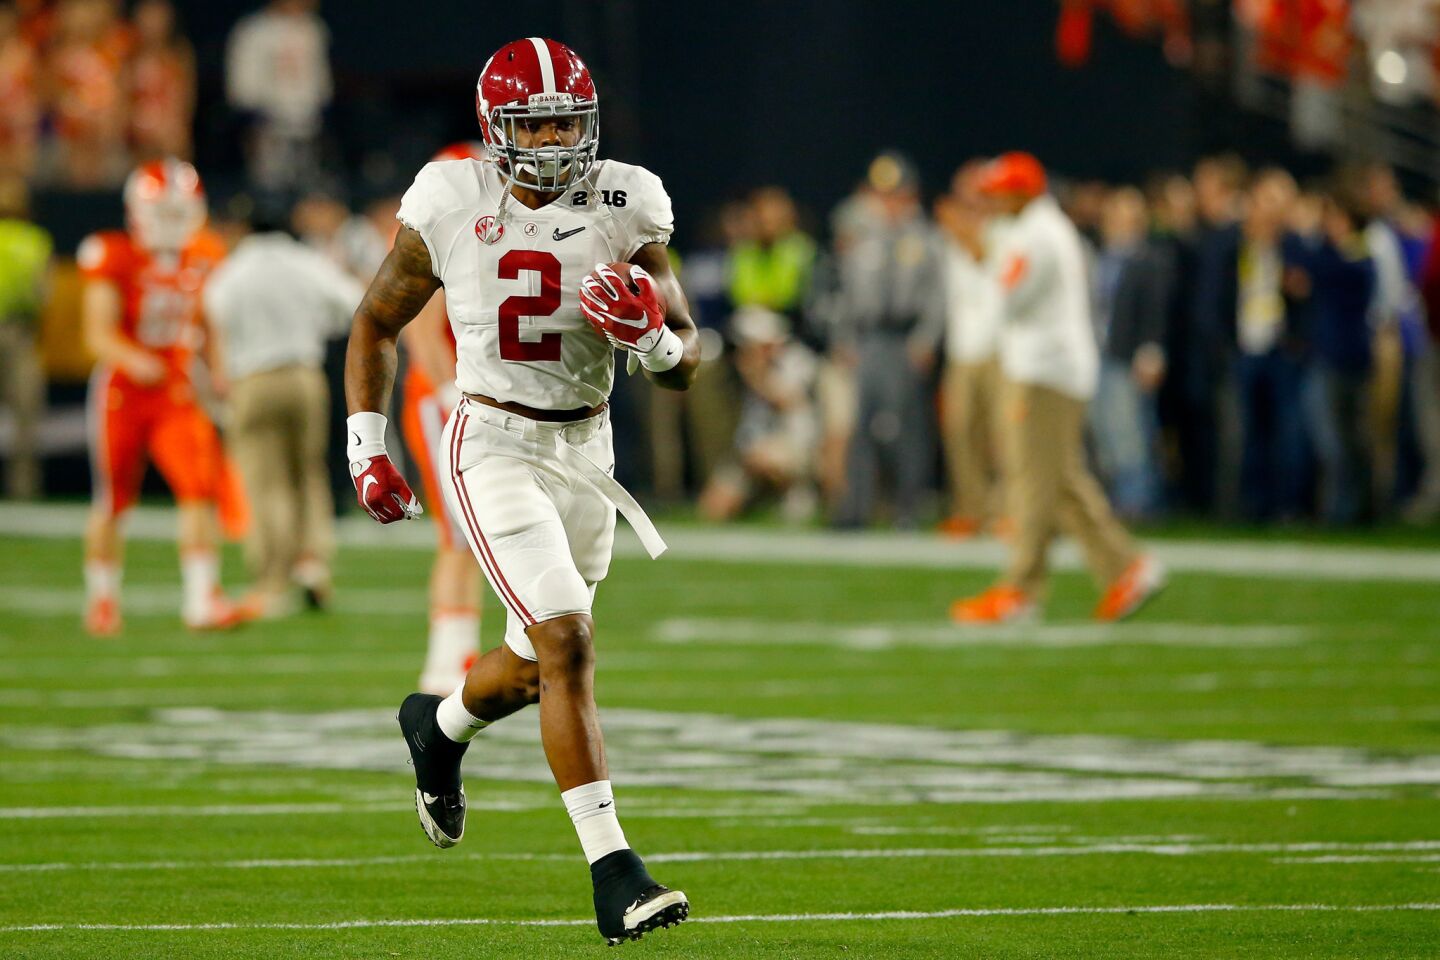 Alabama running back Derrick Henry warms up prior to the 2016 College Football Playoff championship game against the Clemson Tigers.